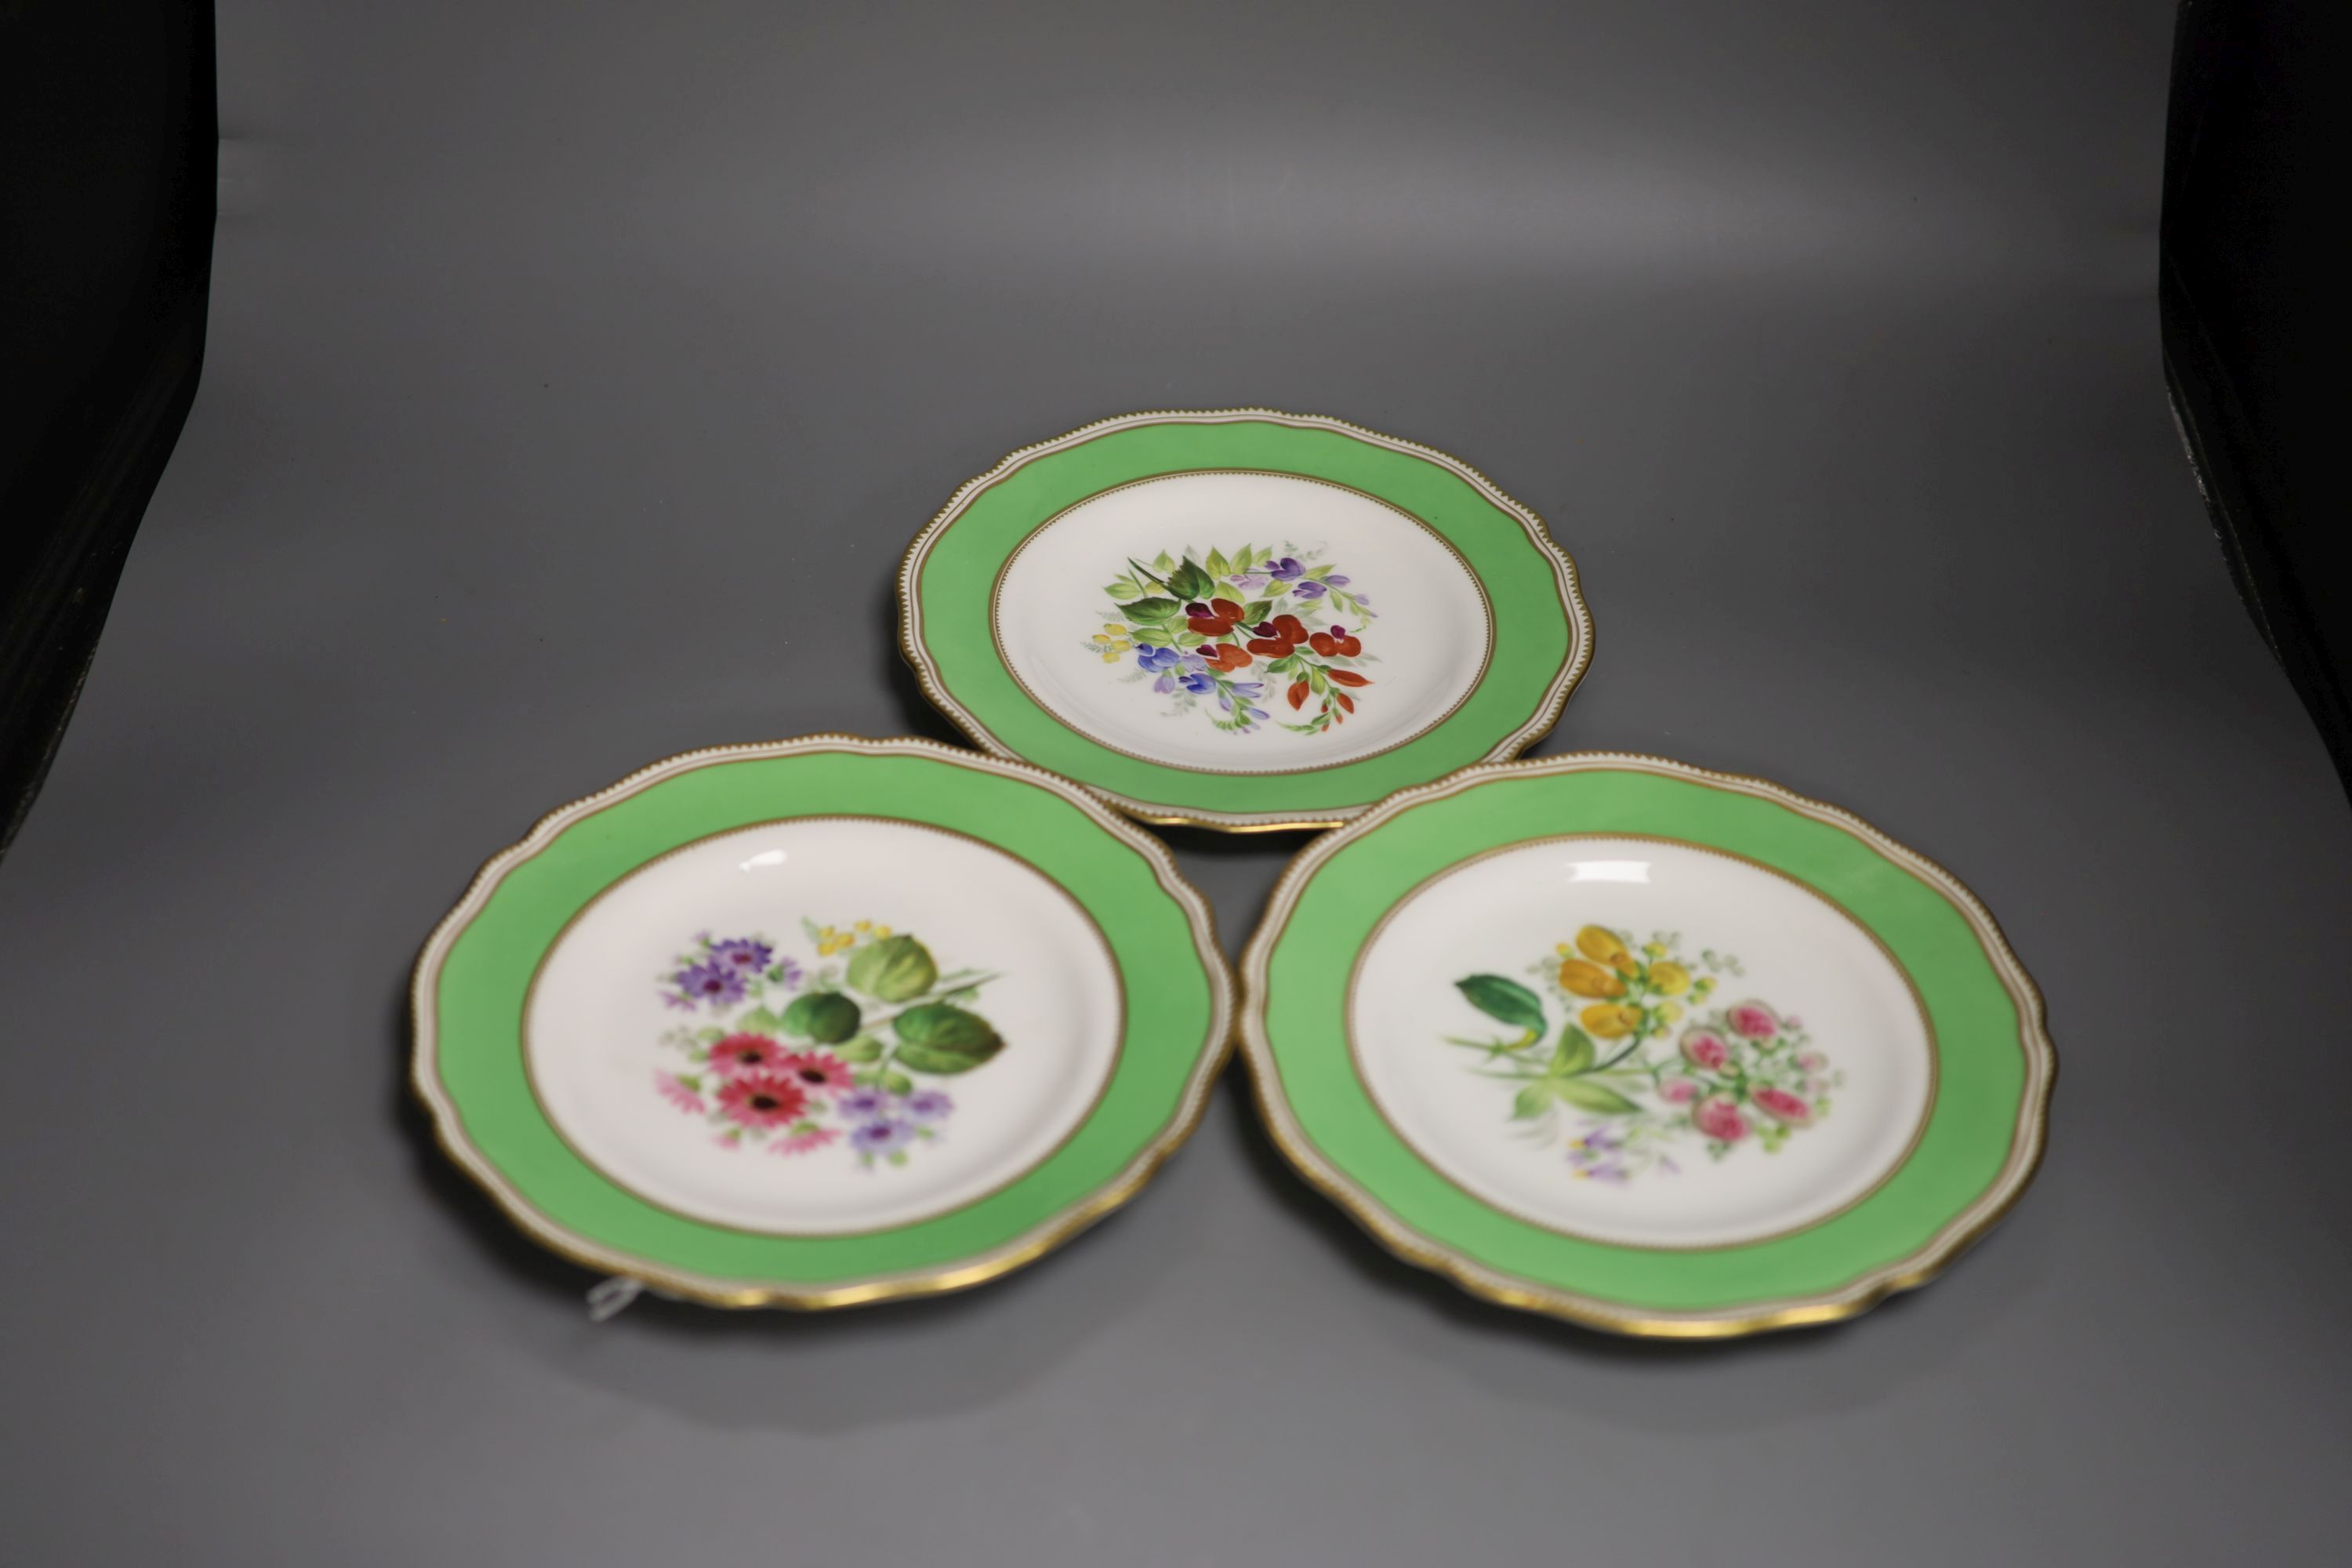 A Copeland set of six plates painted with sprays of flowers, 1851-1885 D.1836, diameter 23cm